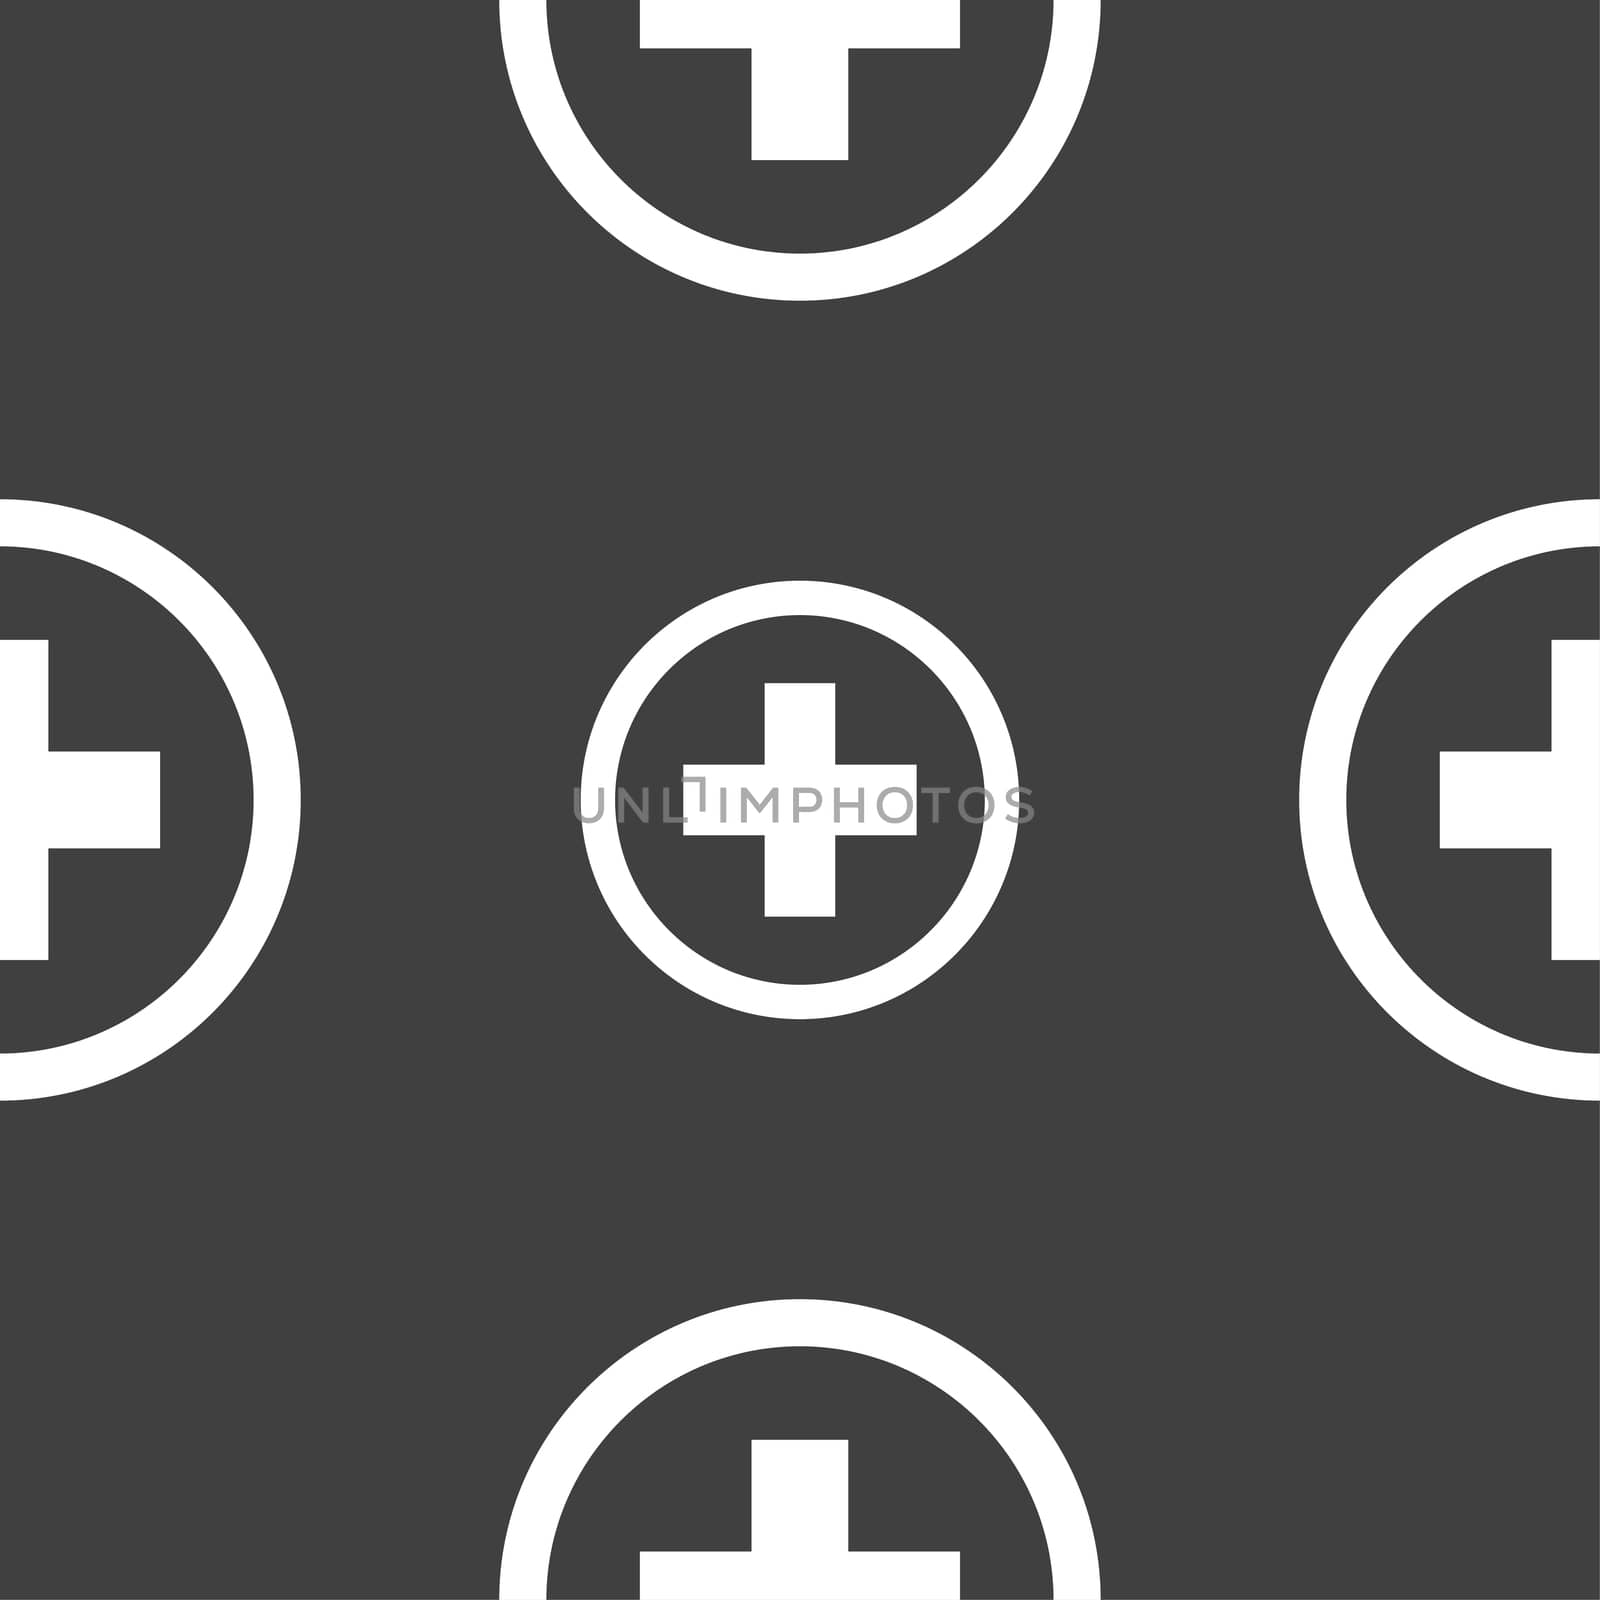 Plus sign icon. Positive symbol. Zoom in. Seamless pattern on a gray background. illustration